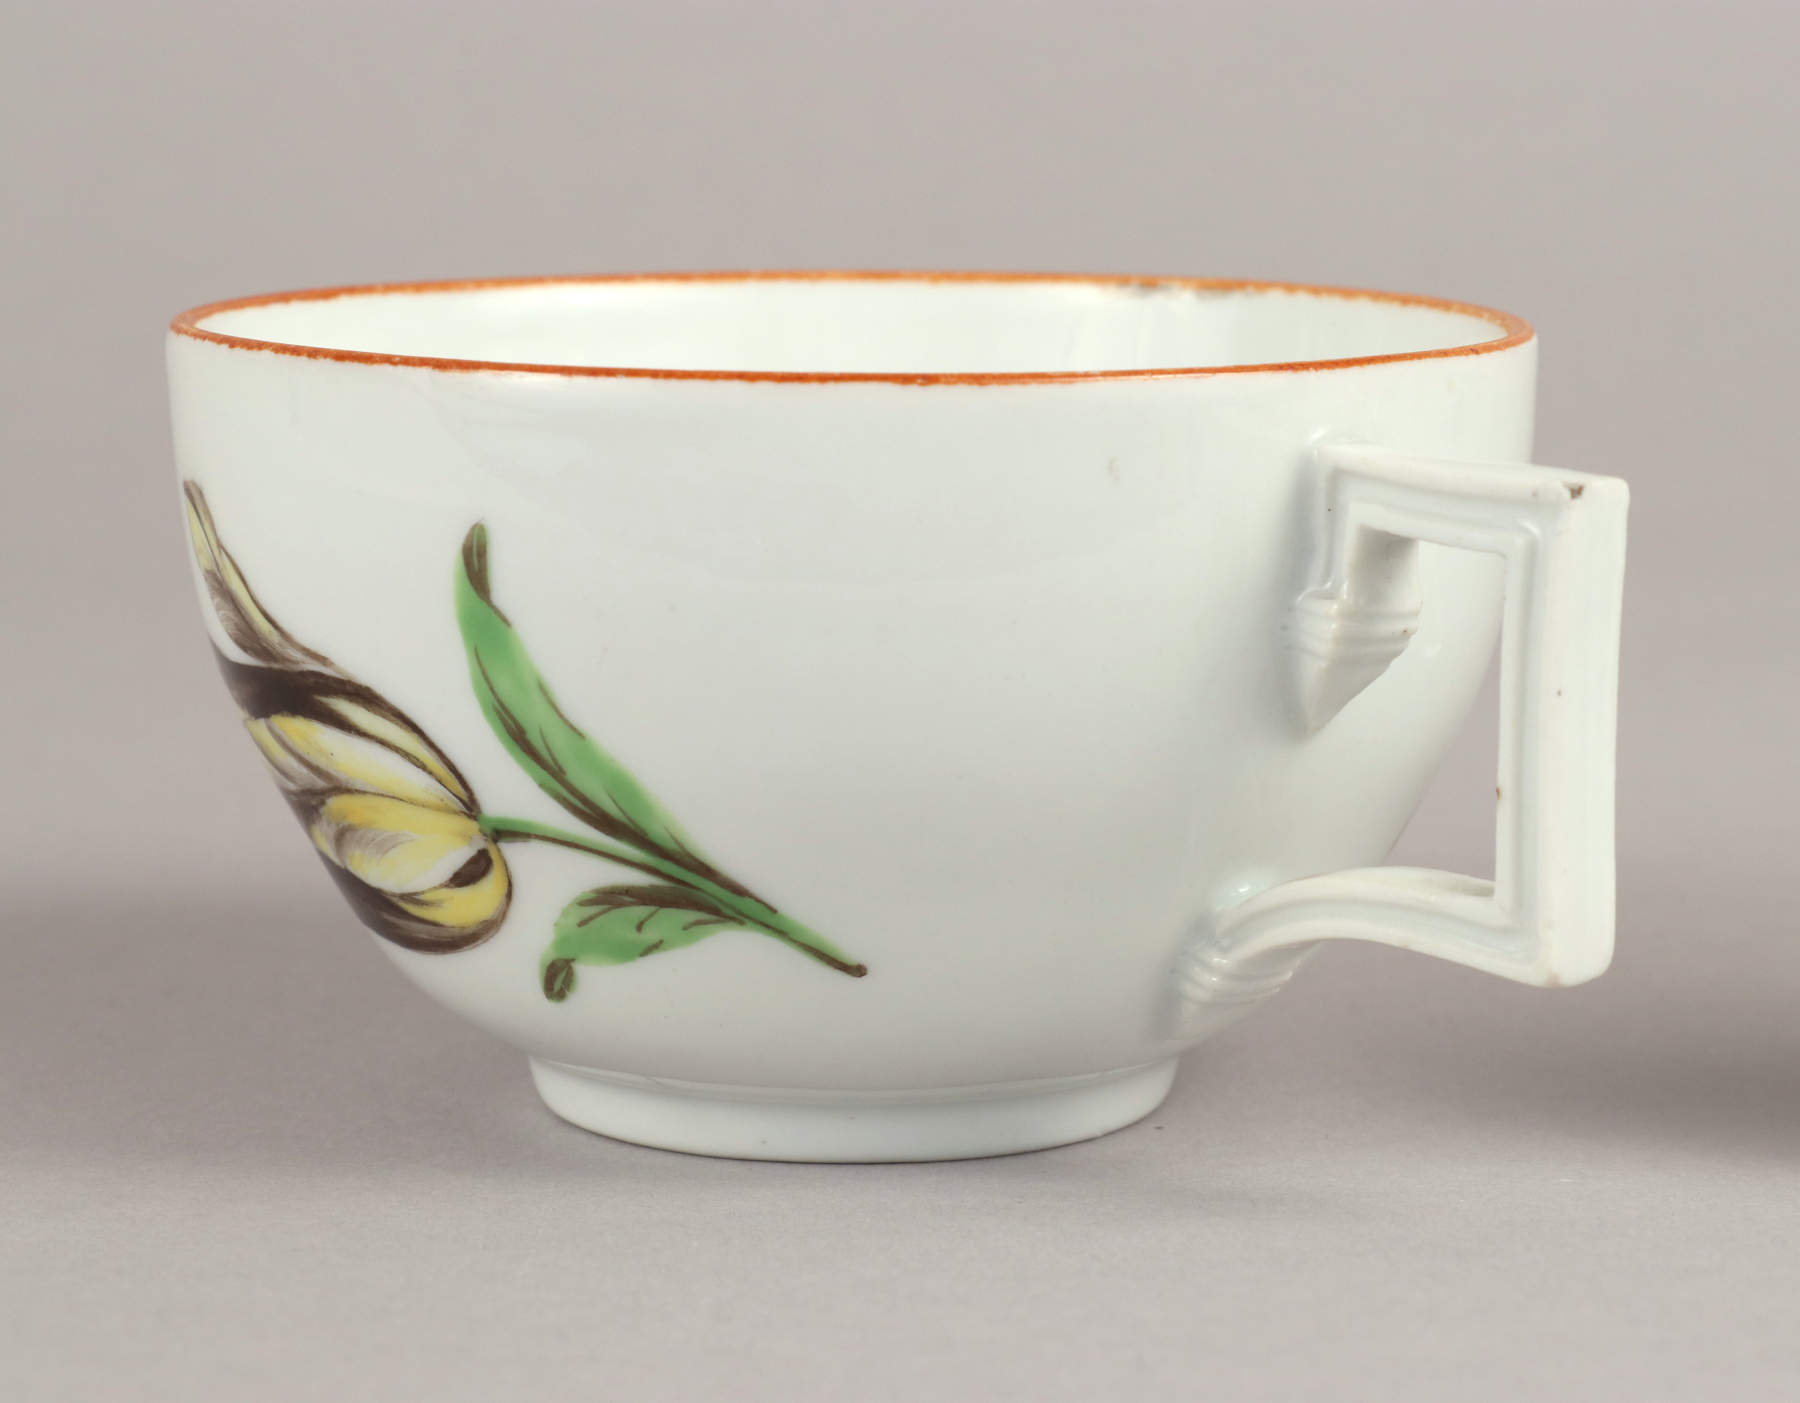 Marcolini Meissen Cup and Saucer, c. 1810